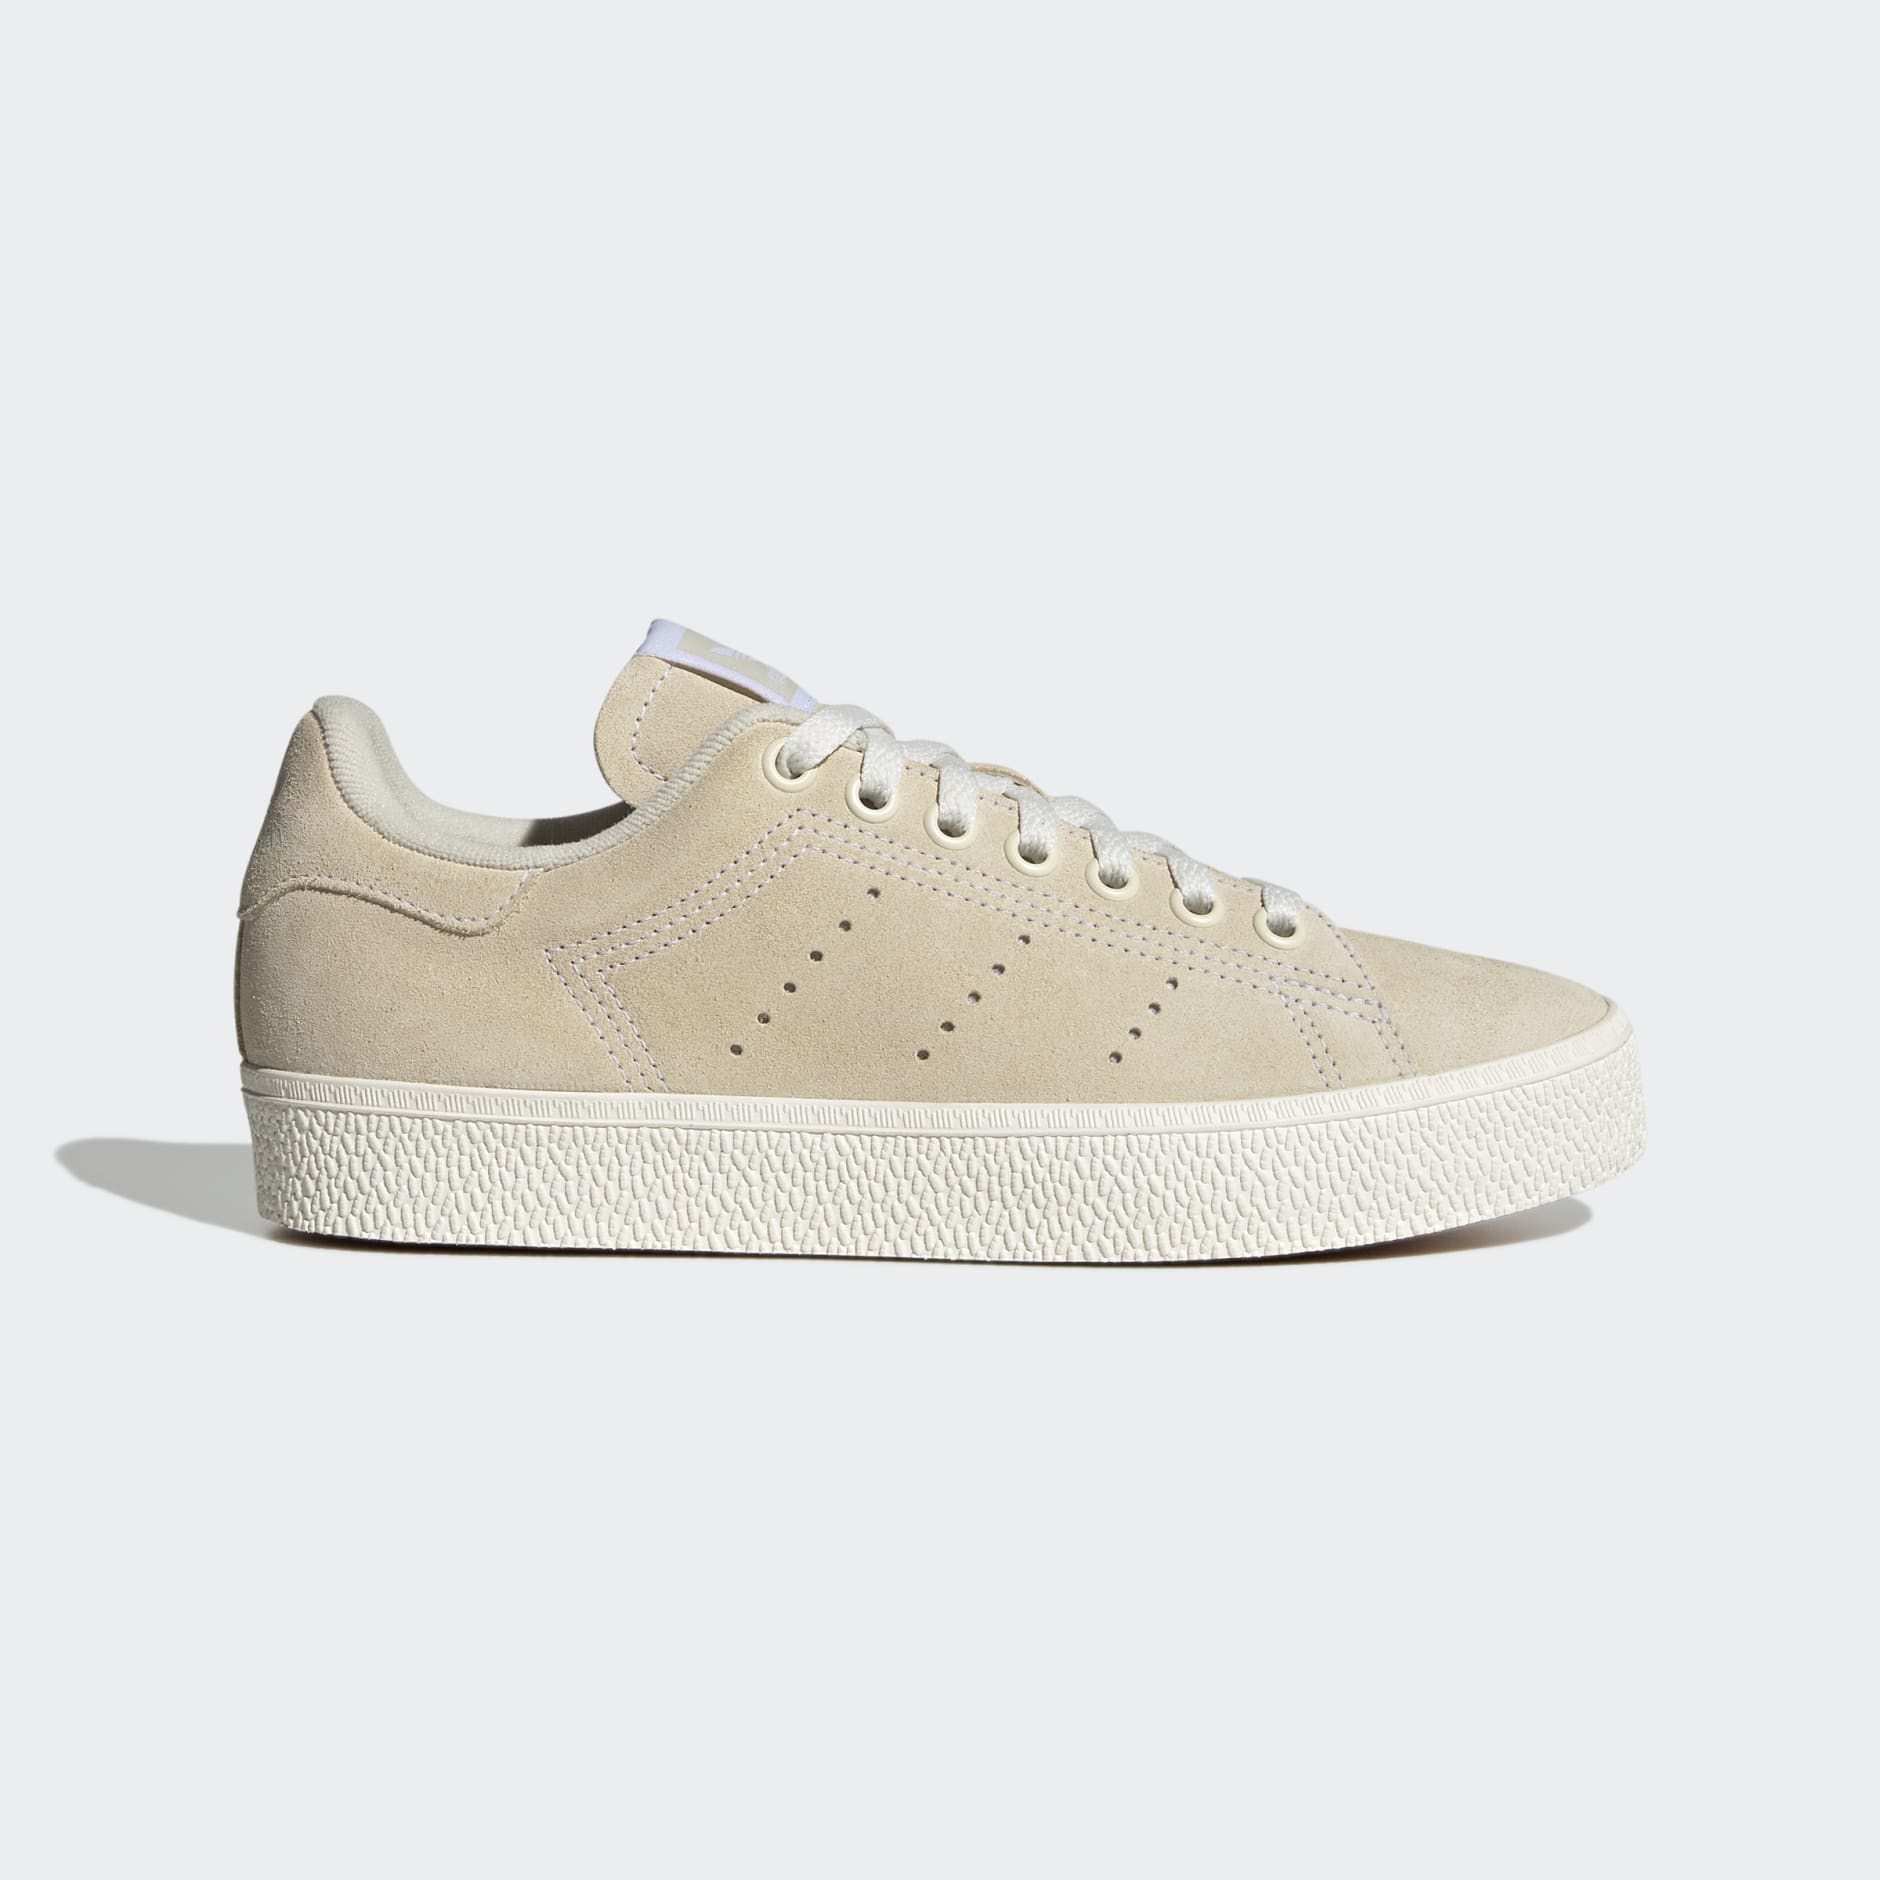 Buy adidas Stan Smith - All releases at a glance at grailify.com